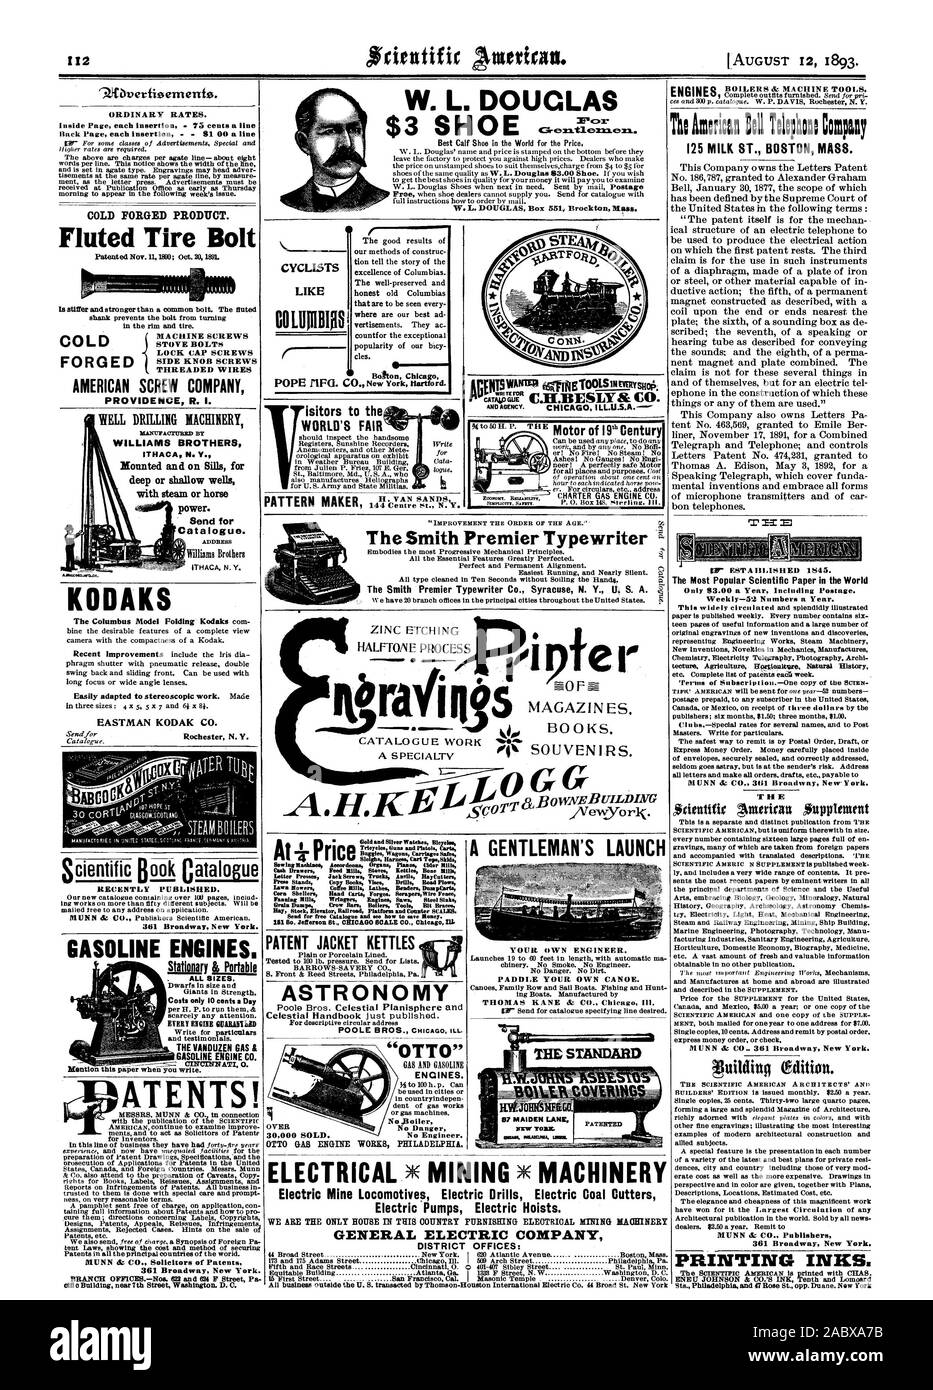 No Engineer. YOUR OWN ENGINEER. PADDLE YOUR OWN CANOE. THOMAS KANE & CO. Chicag Ill. 87 MAIDEN LANE Electric Mine Locomotives Electric Drills Electric Coal Cutters Electric Pumps Electric Hoists. GENERAL ELECTRIC COMPANY DISTRICT OFFICES: p, scientific american, 1893-08-12 Stock Photo